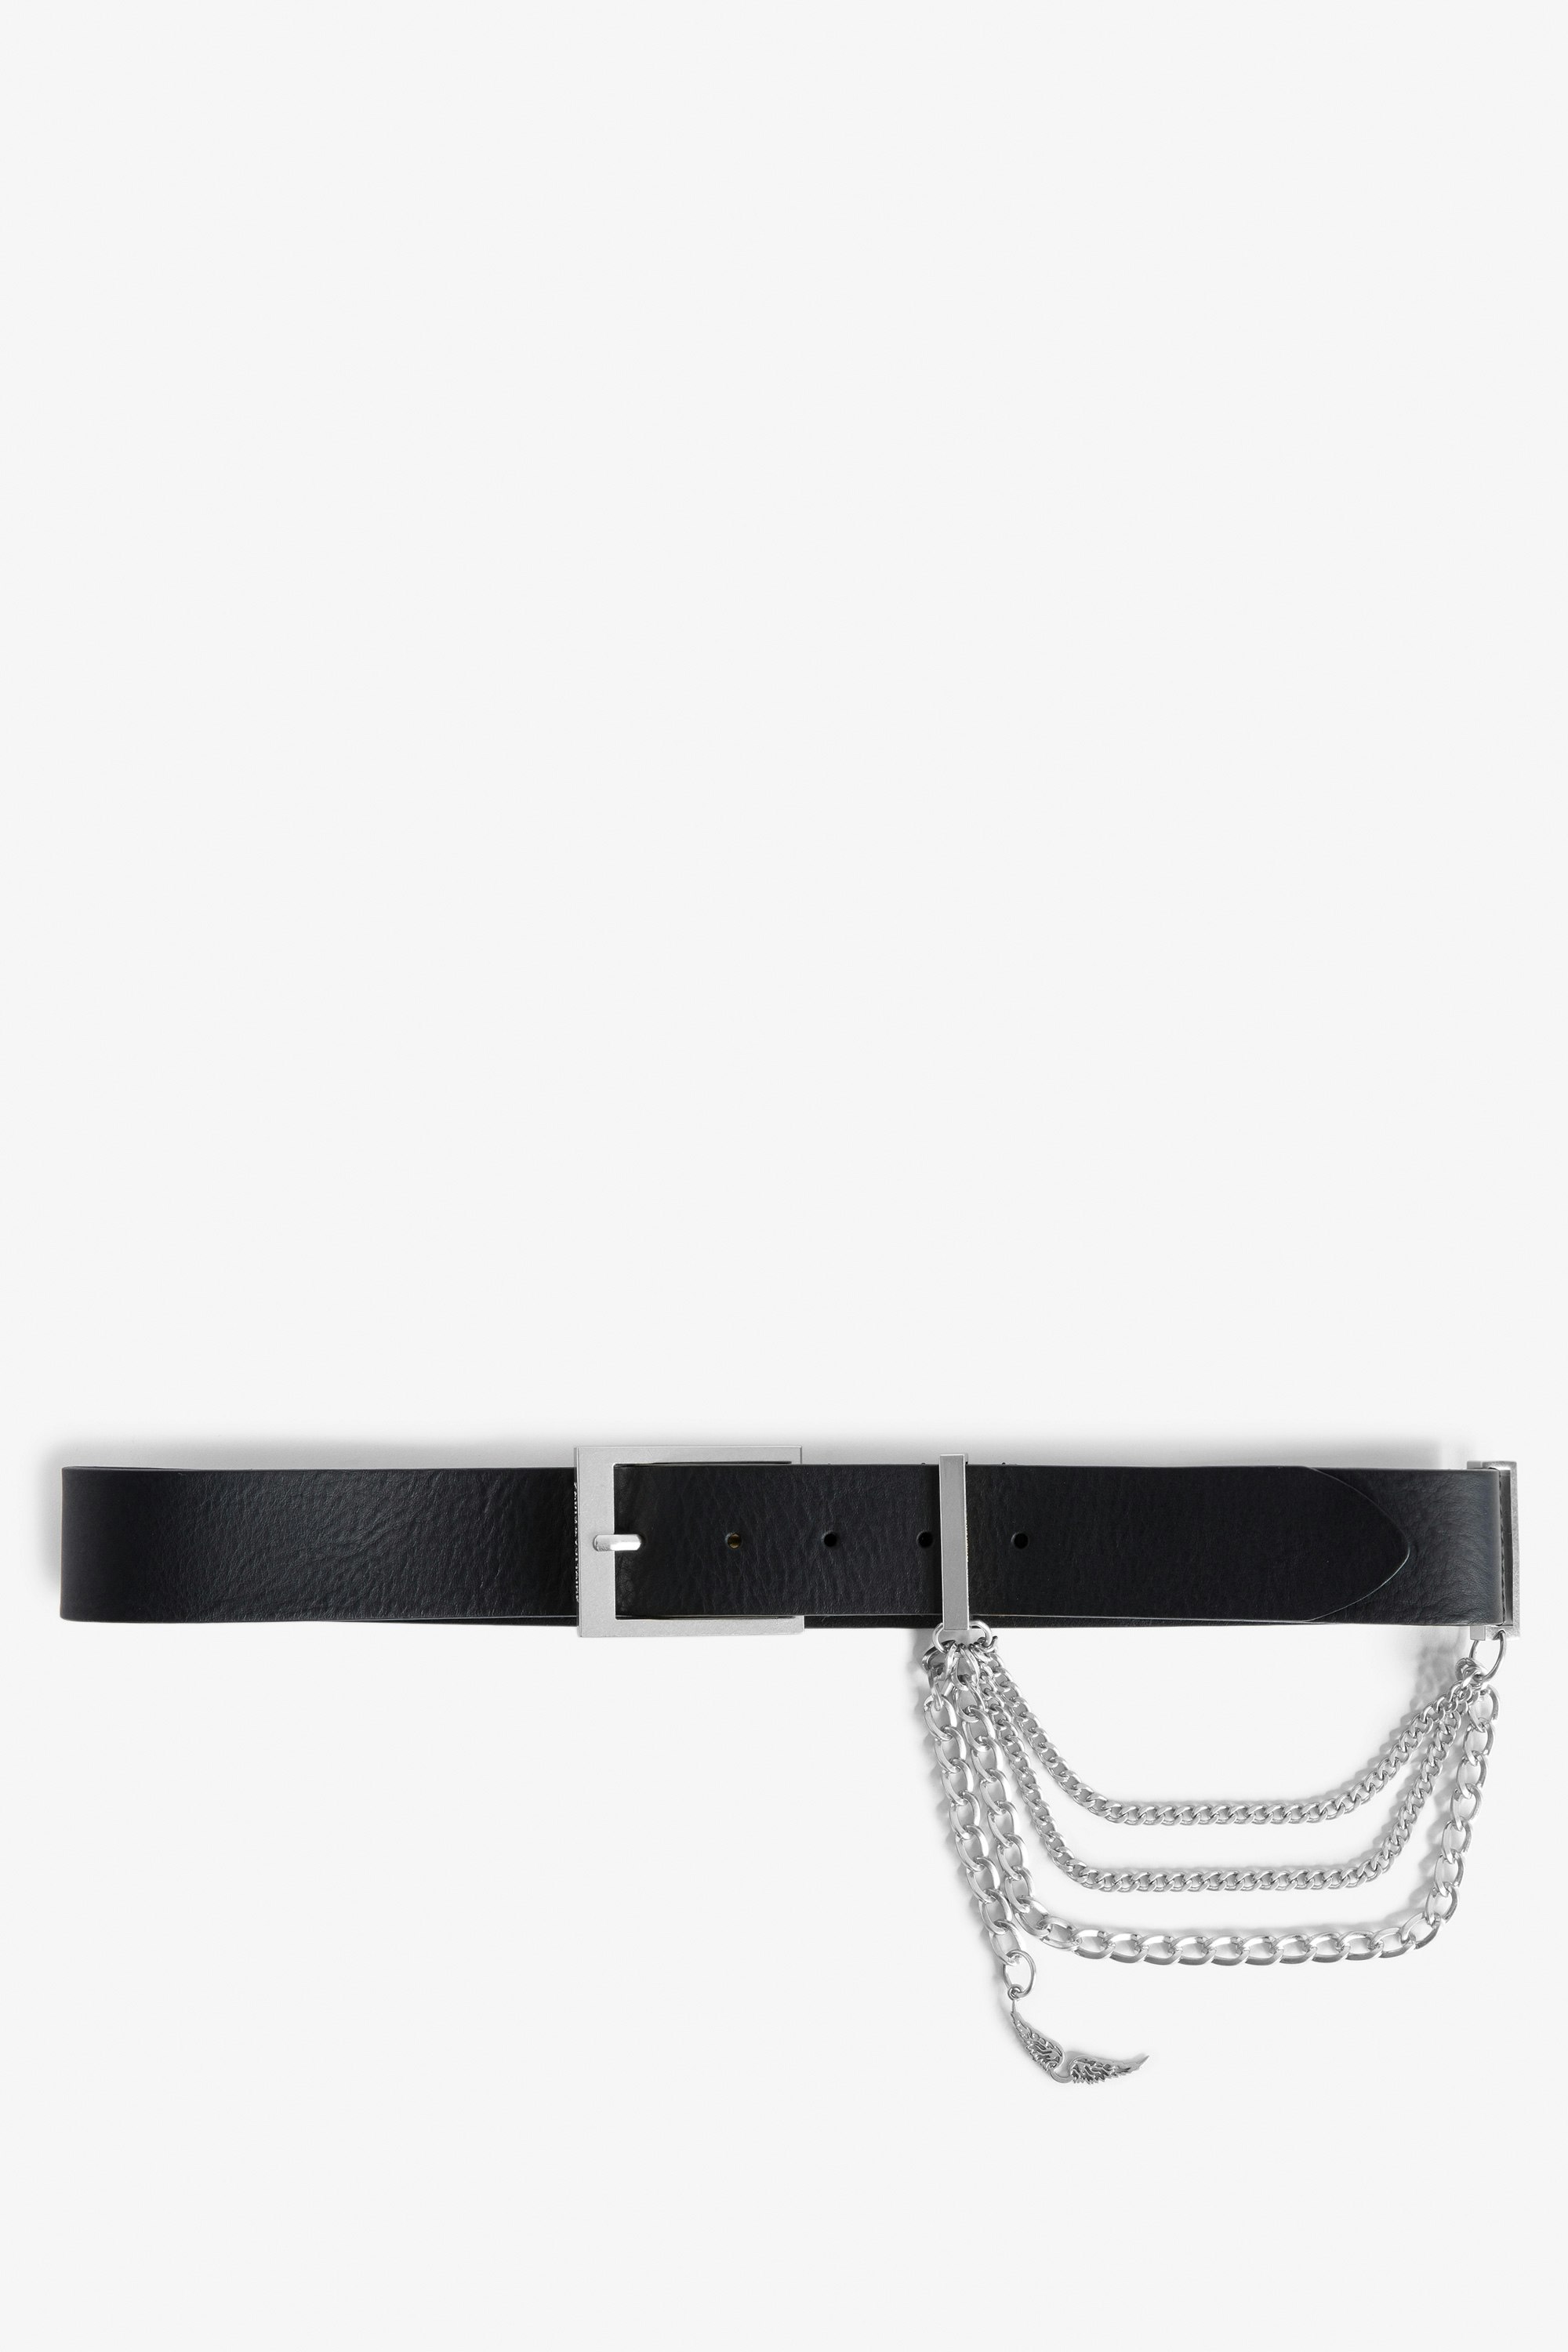 Rock Chain Glossy Wild Belt Women black python-effect patent leather belt with triple chain and wings charm.